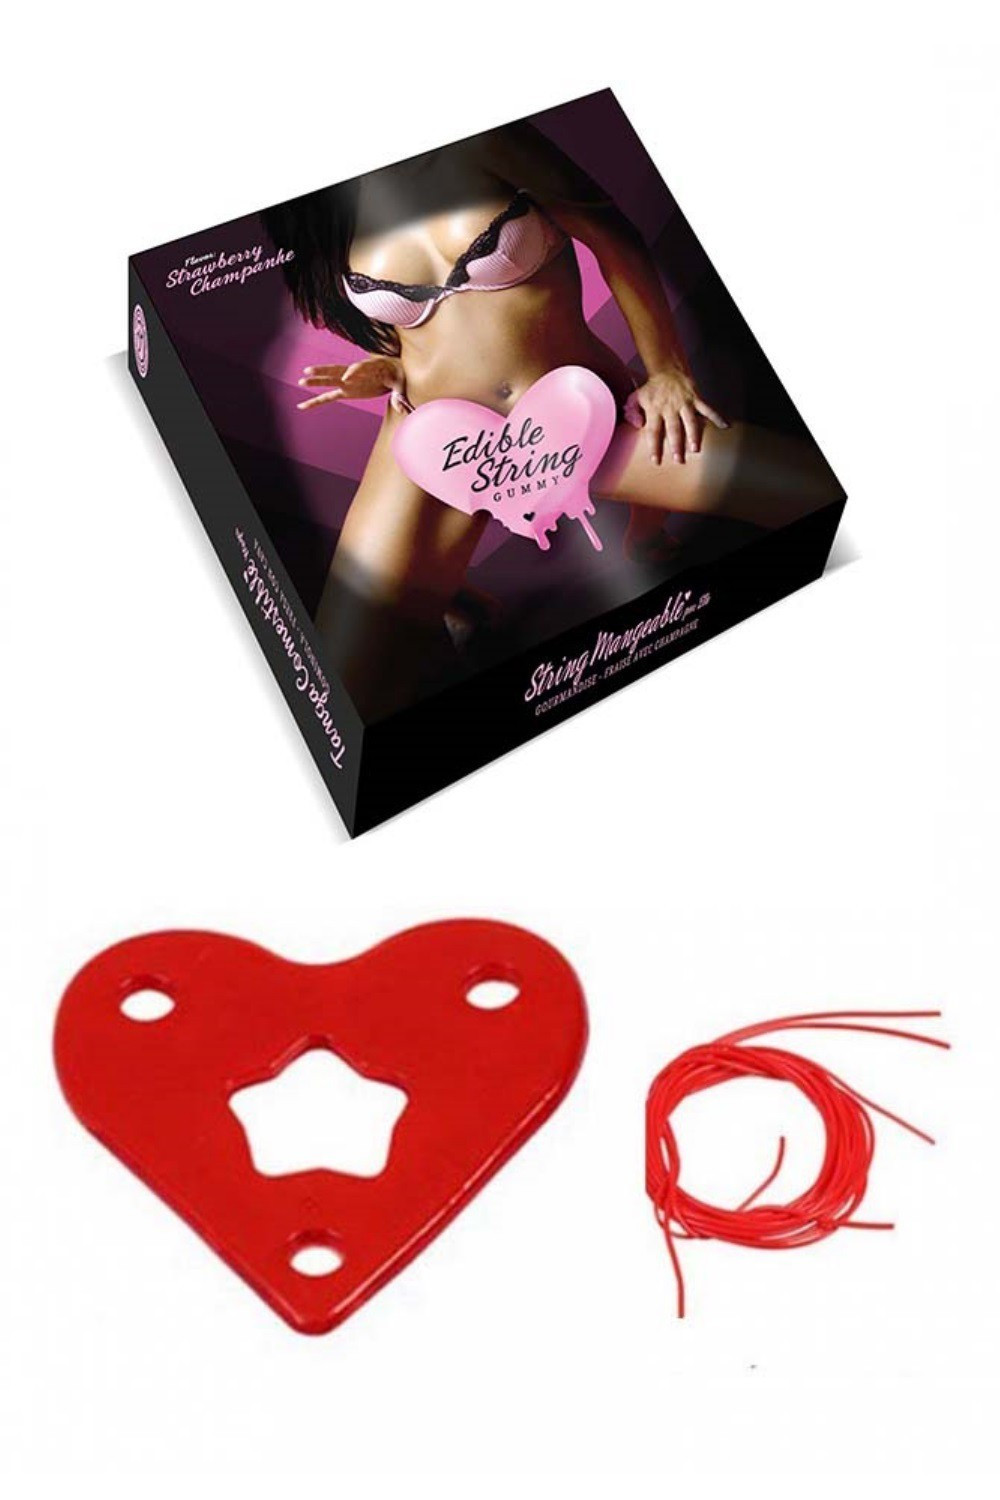 Edible thong for her - Sensual lingerie